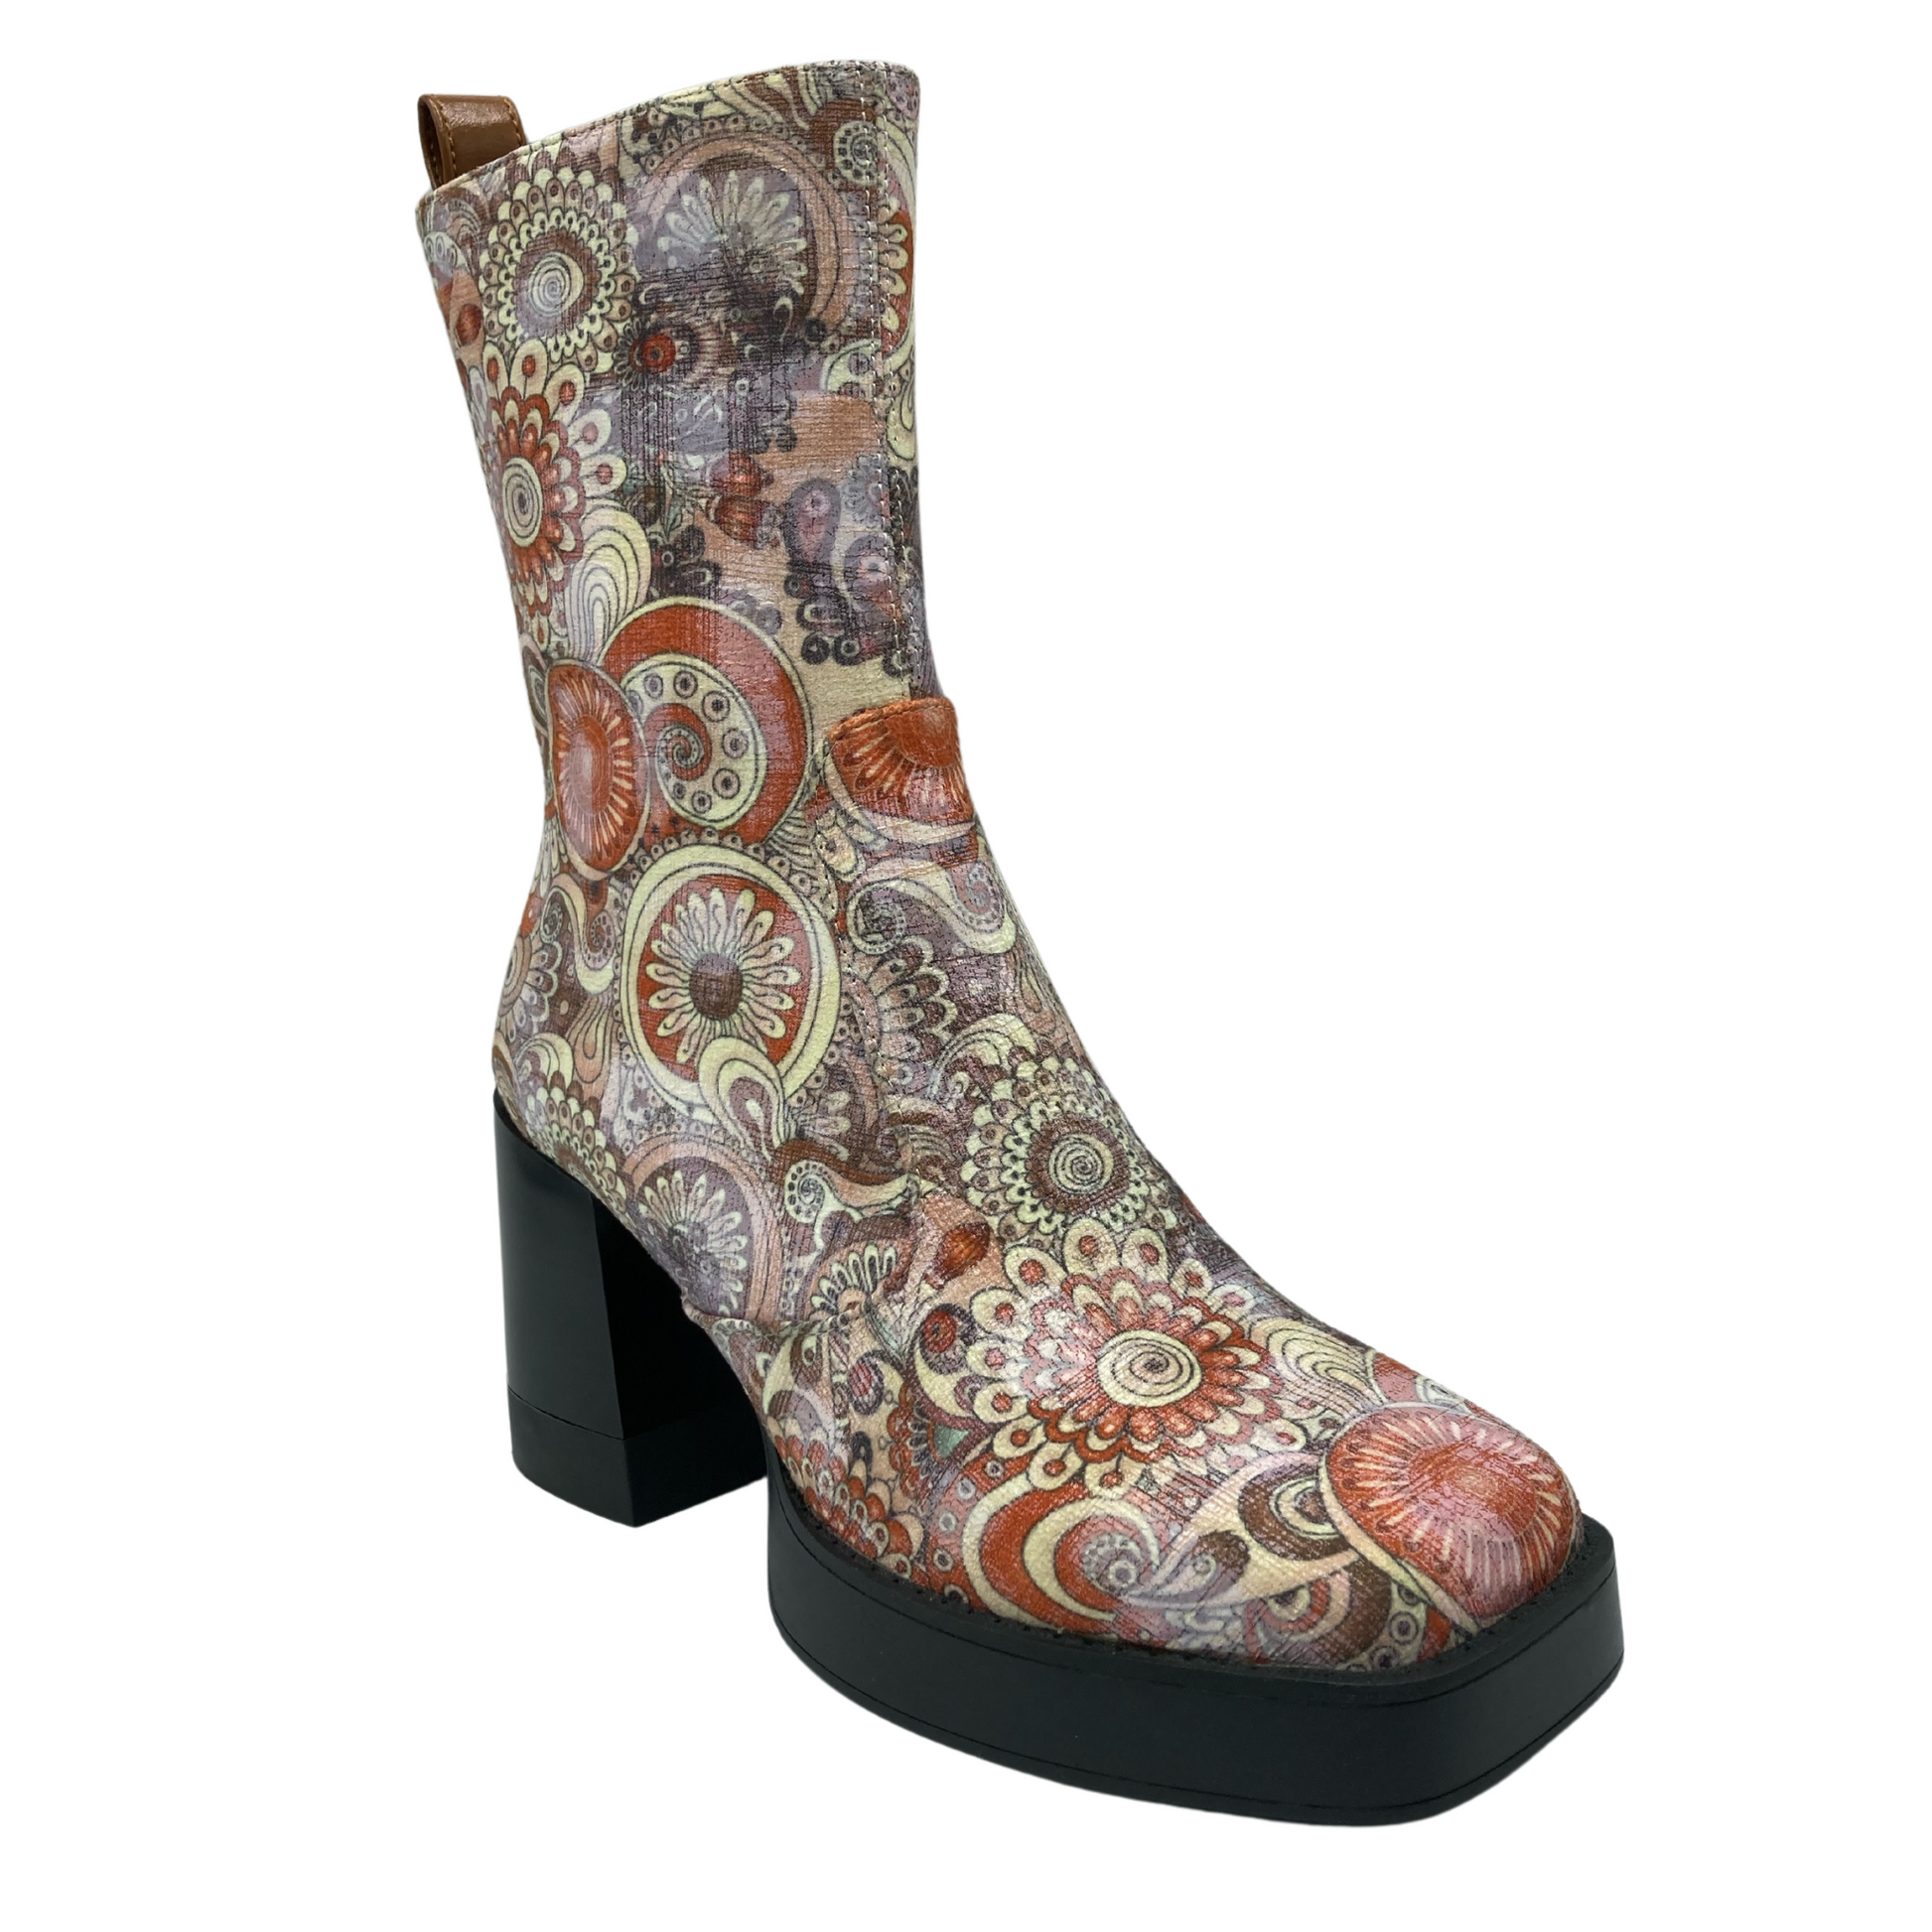 45 degree angled view of retro flower print boot with square toe and block heel